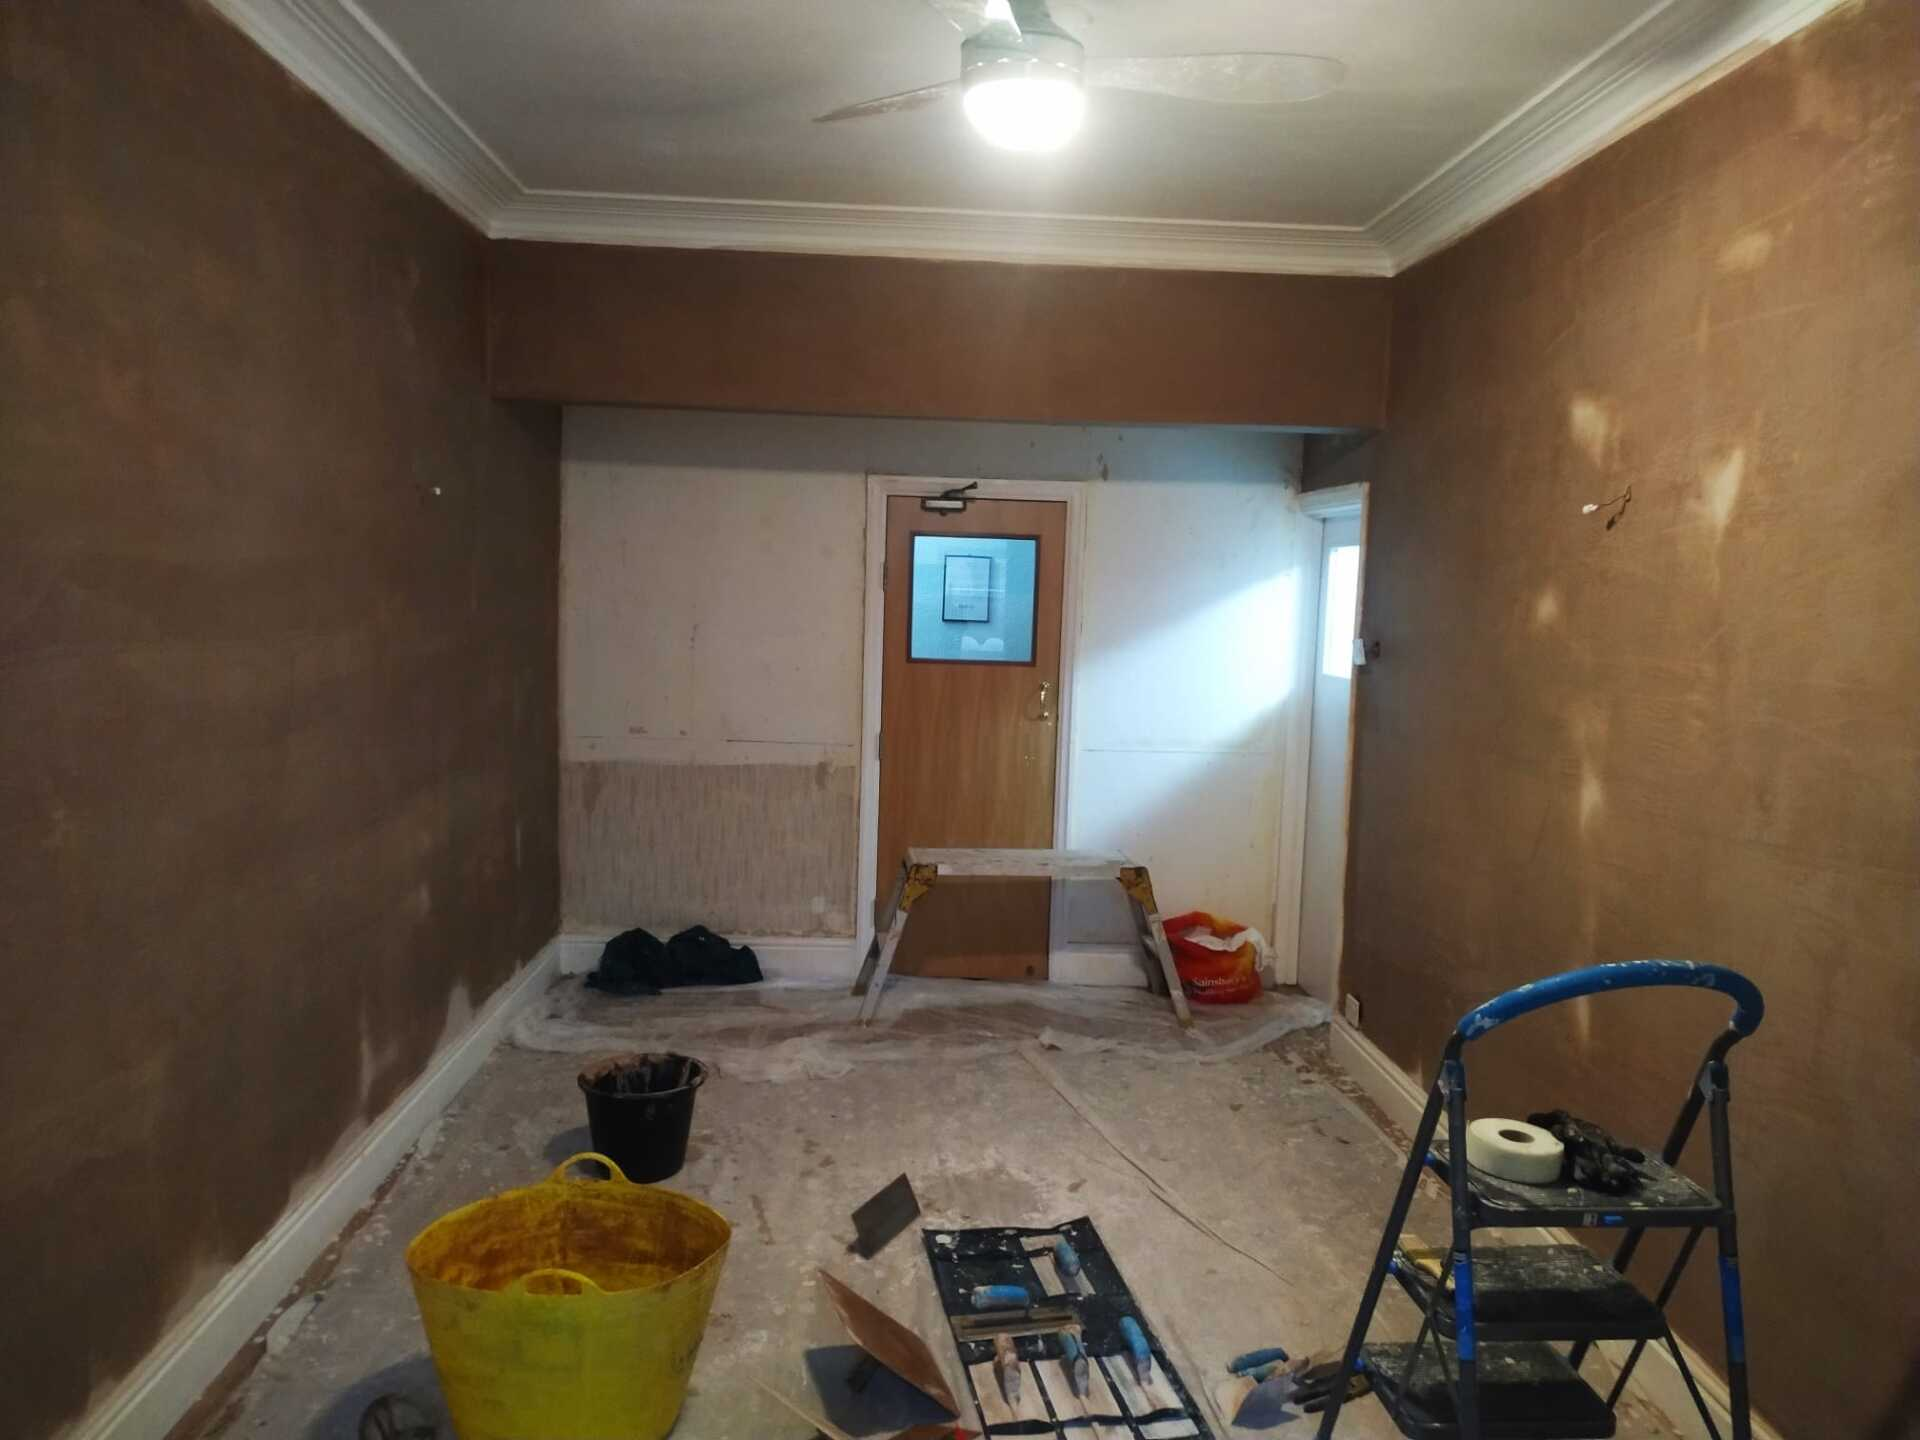 Our dining room mid renovation